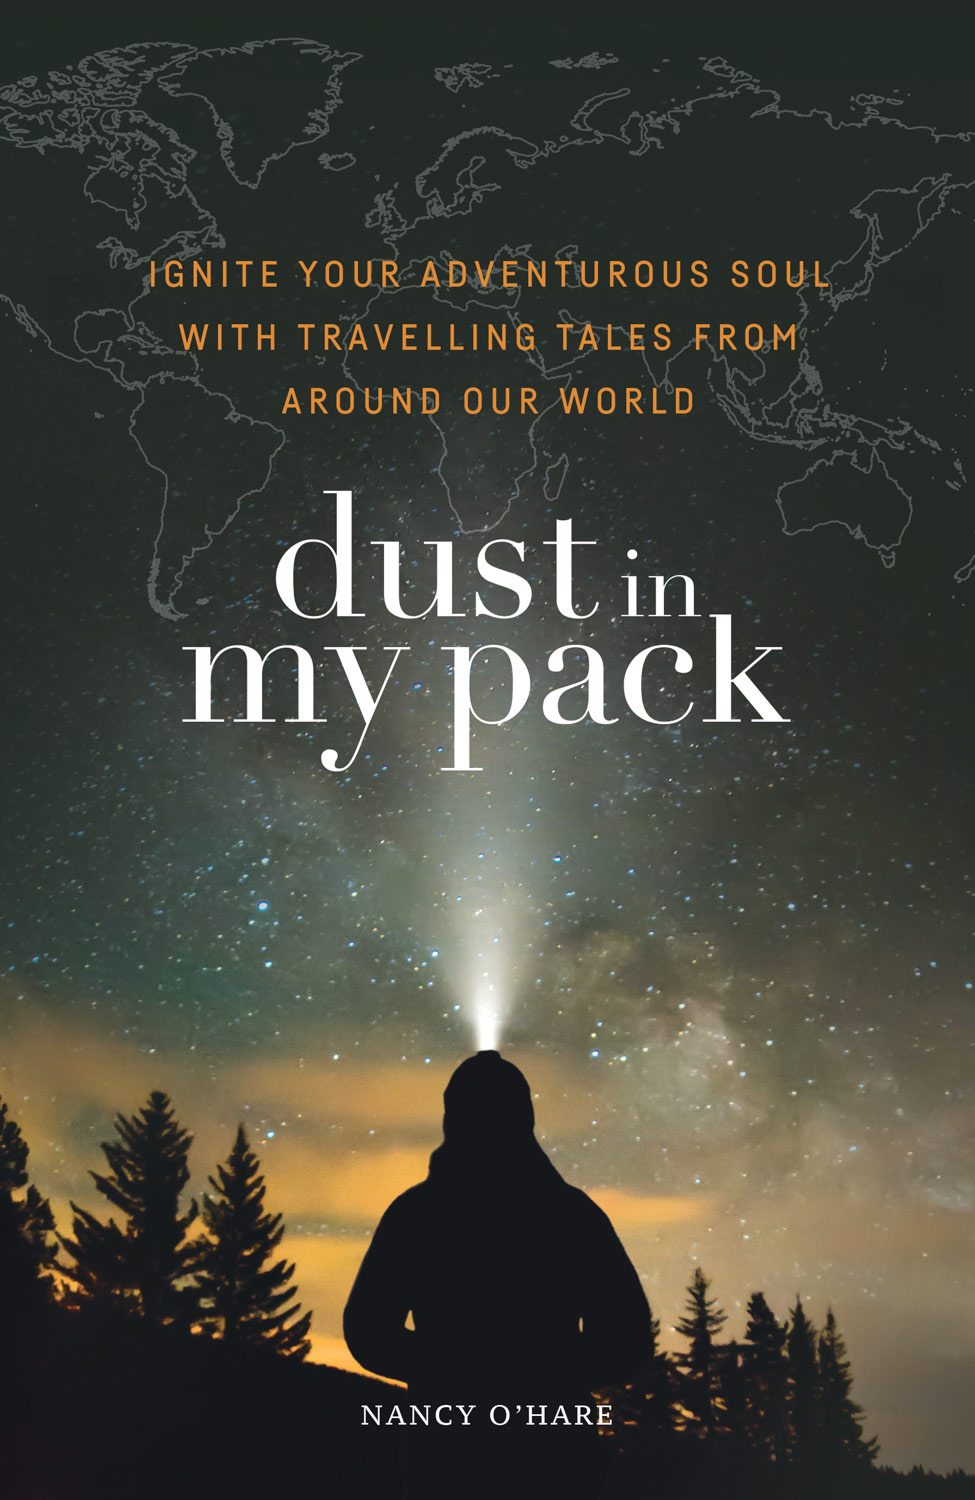 Dust-in-My-Pack-Adventure-Travel-Book